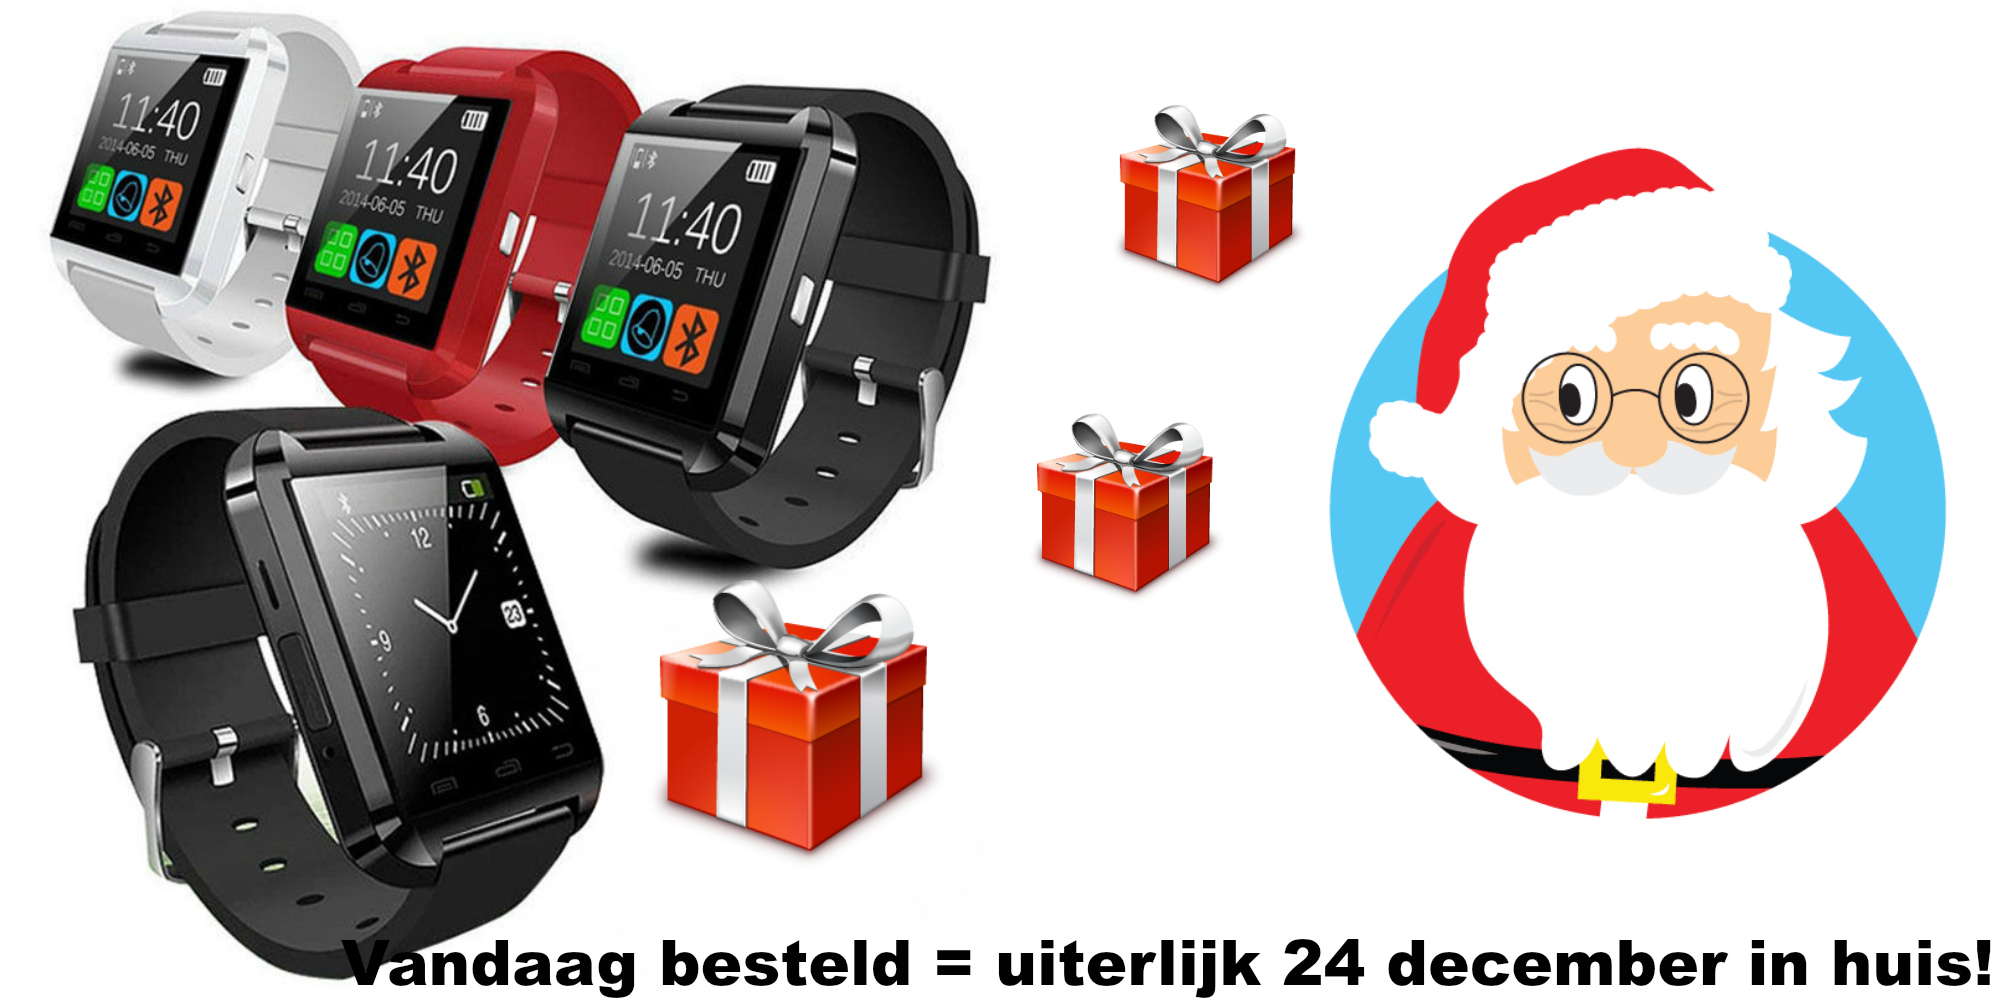 One Day Price - Smartwatch Kerst Deal!